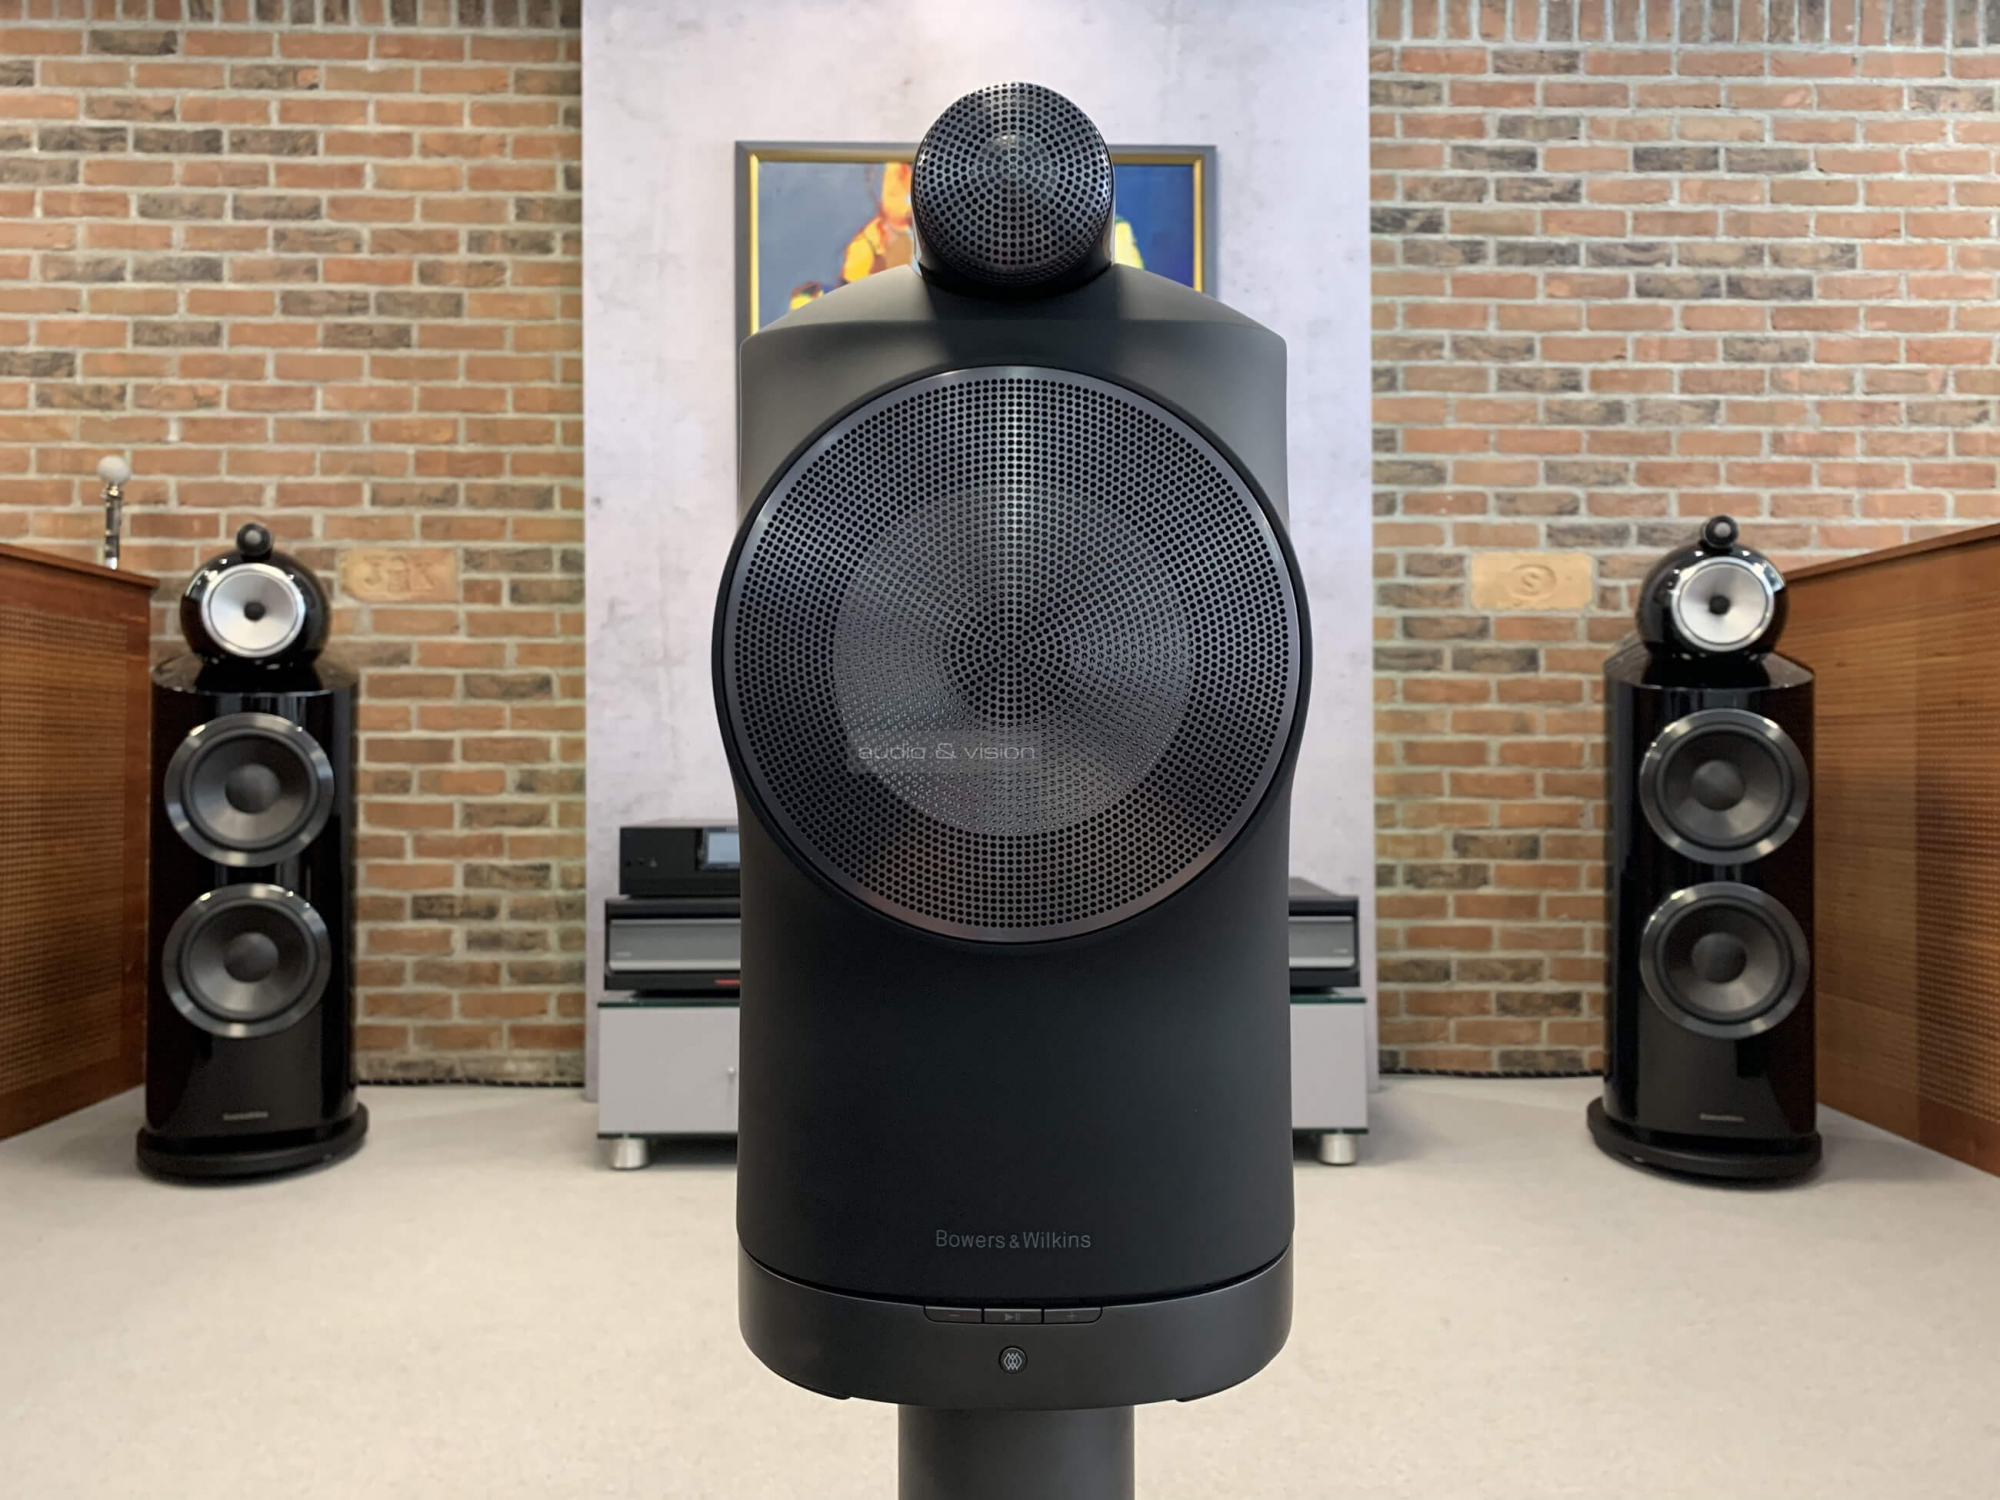 Bowers & Wilkins Formation Duo hangfal